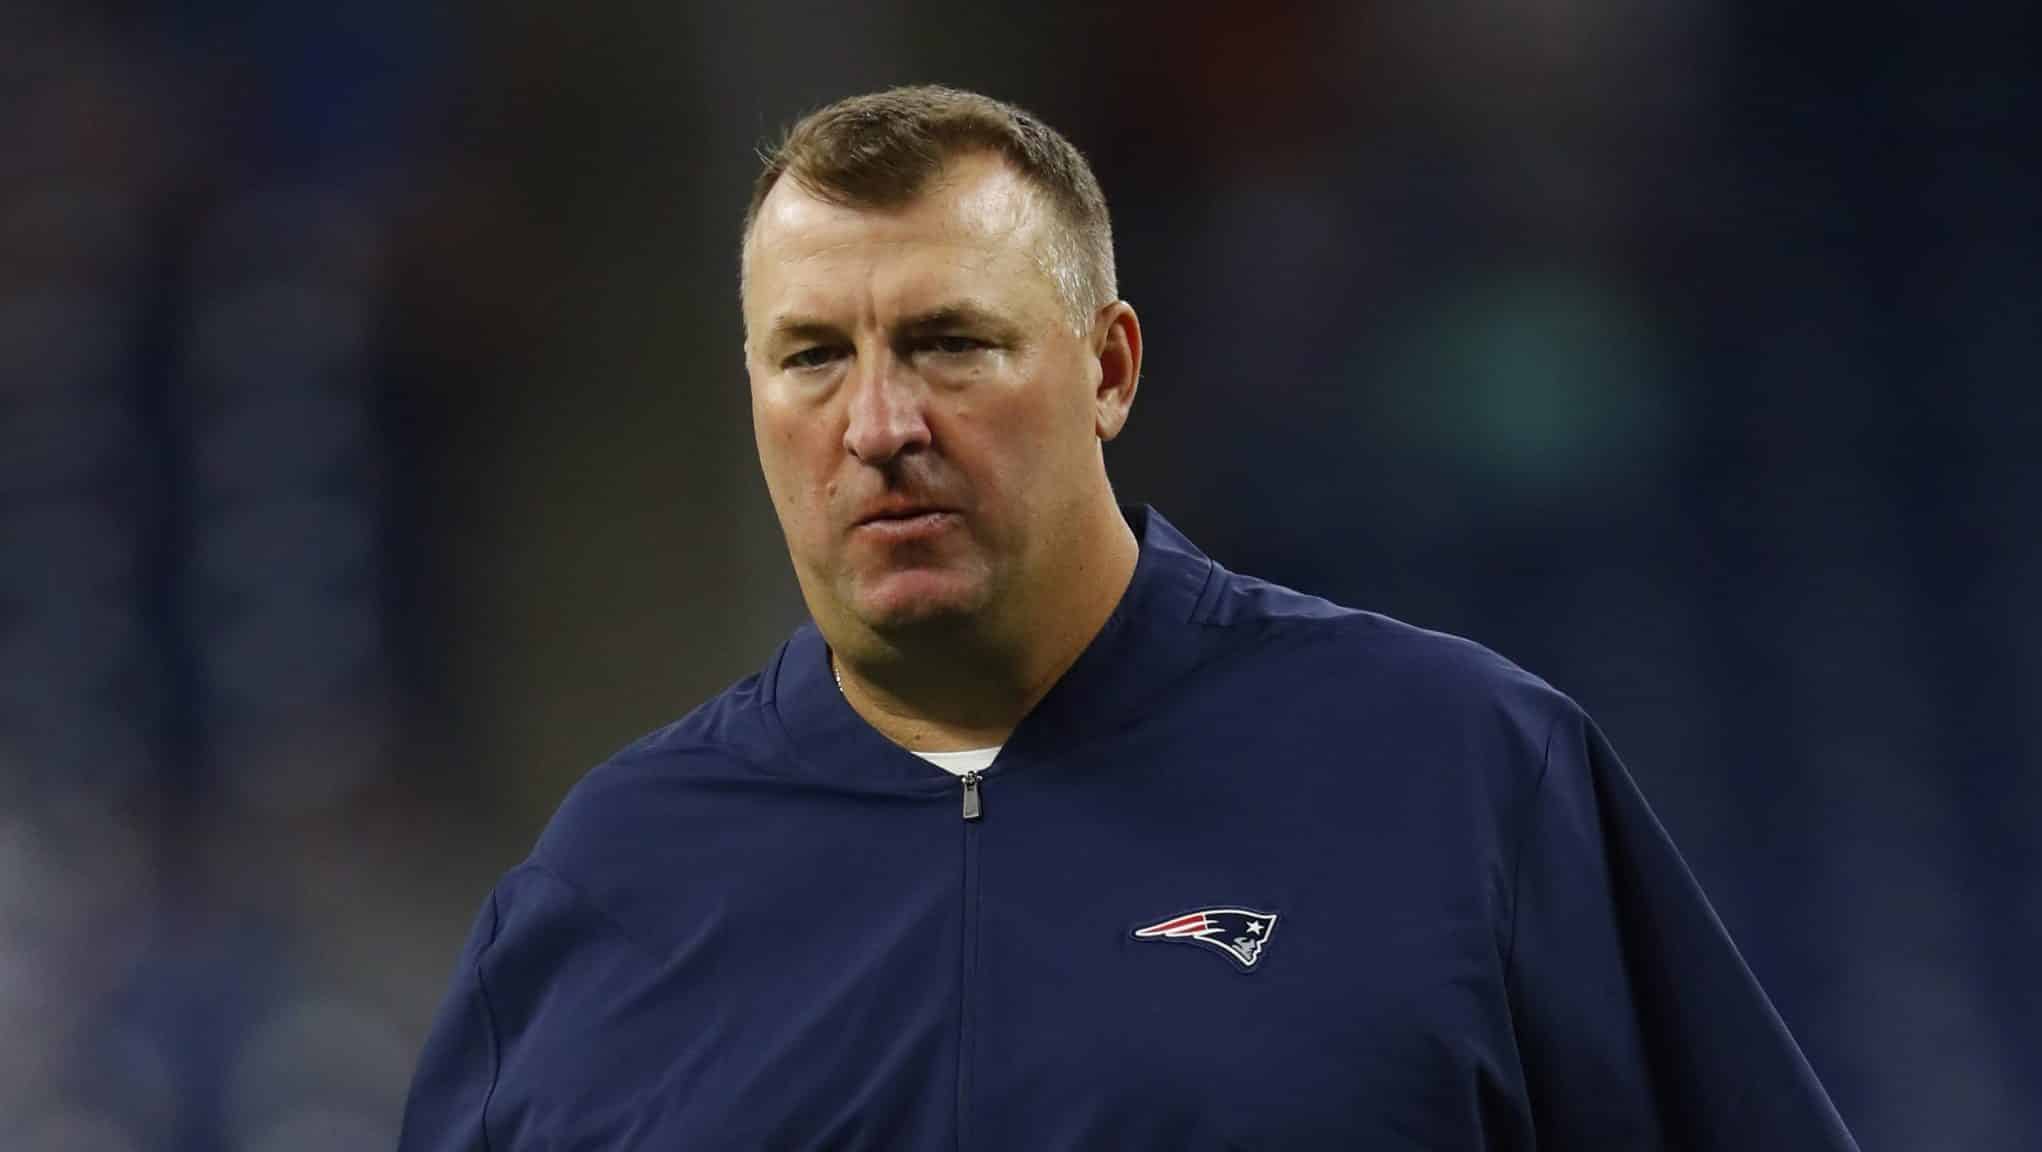 New England Patriots defensive line coach Bret Bielema watches during an NFL preseason football game against the Detroit Lions in Detroit, Thursday, Aug. 8, 2019.